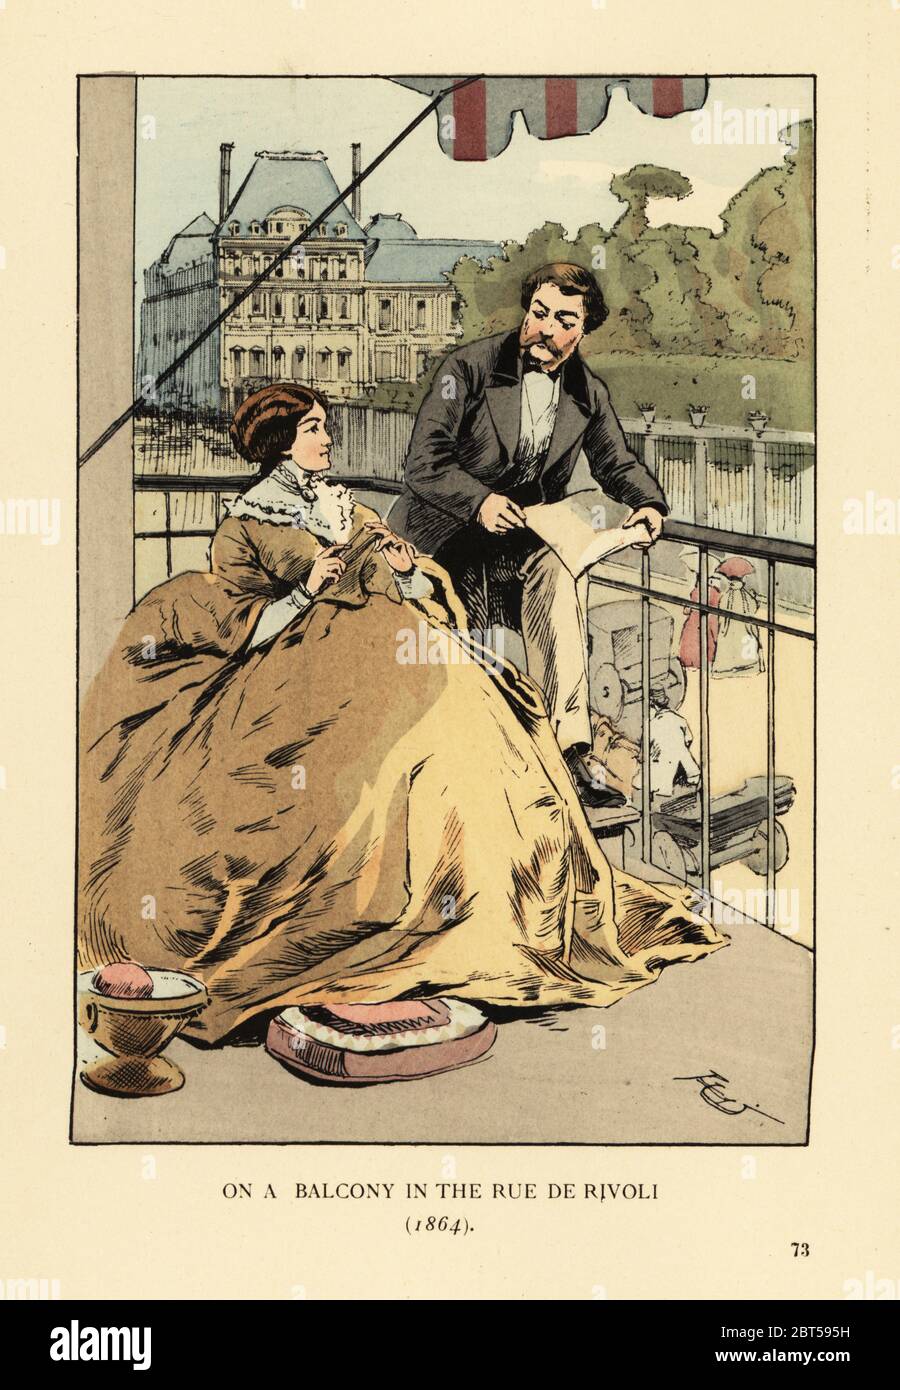 On a balcony in the rue de Rivoli, Paris, 1864. Woman with mustard crinoline dress with pelerine. The Louvre and Jardin des Tuileries across the street. Handcoloured lithograph by R.V. after an illustration by Francois Courboin from Octave Uzannes Fashion in Paris, William Heinemann, London, 1898. Stock Photo